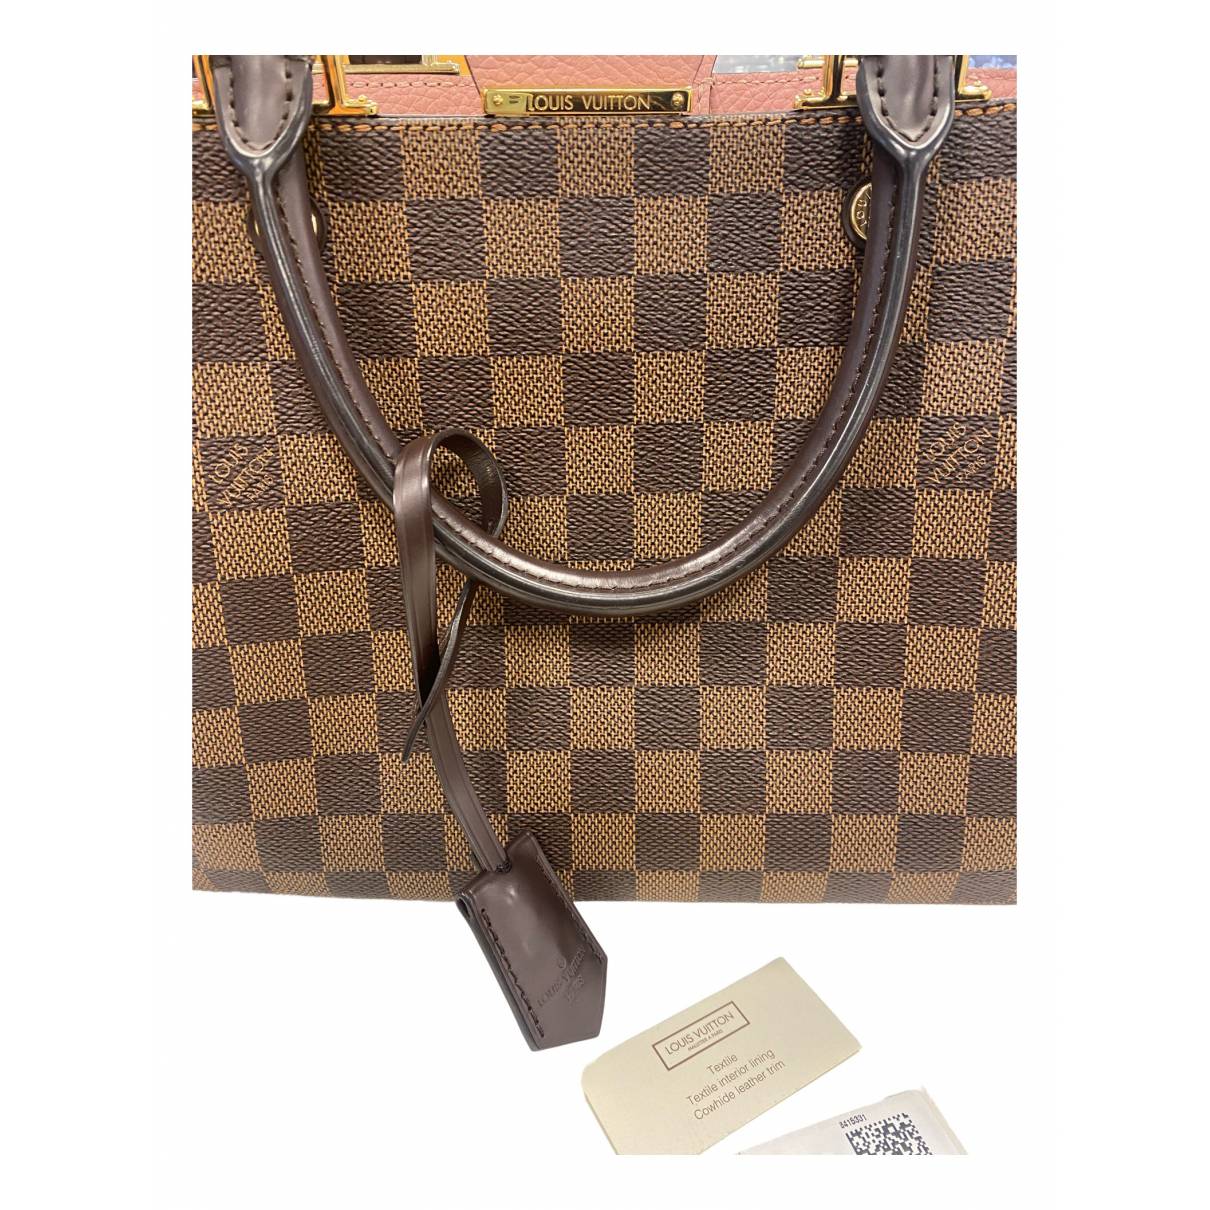 Louis Vuitton - Authenticated Brittany Handbag - Leather Brown for Women, Very Good Condition